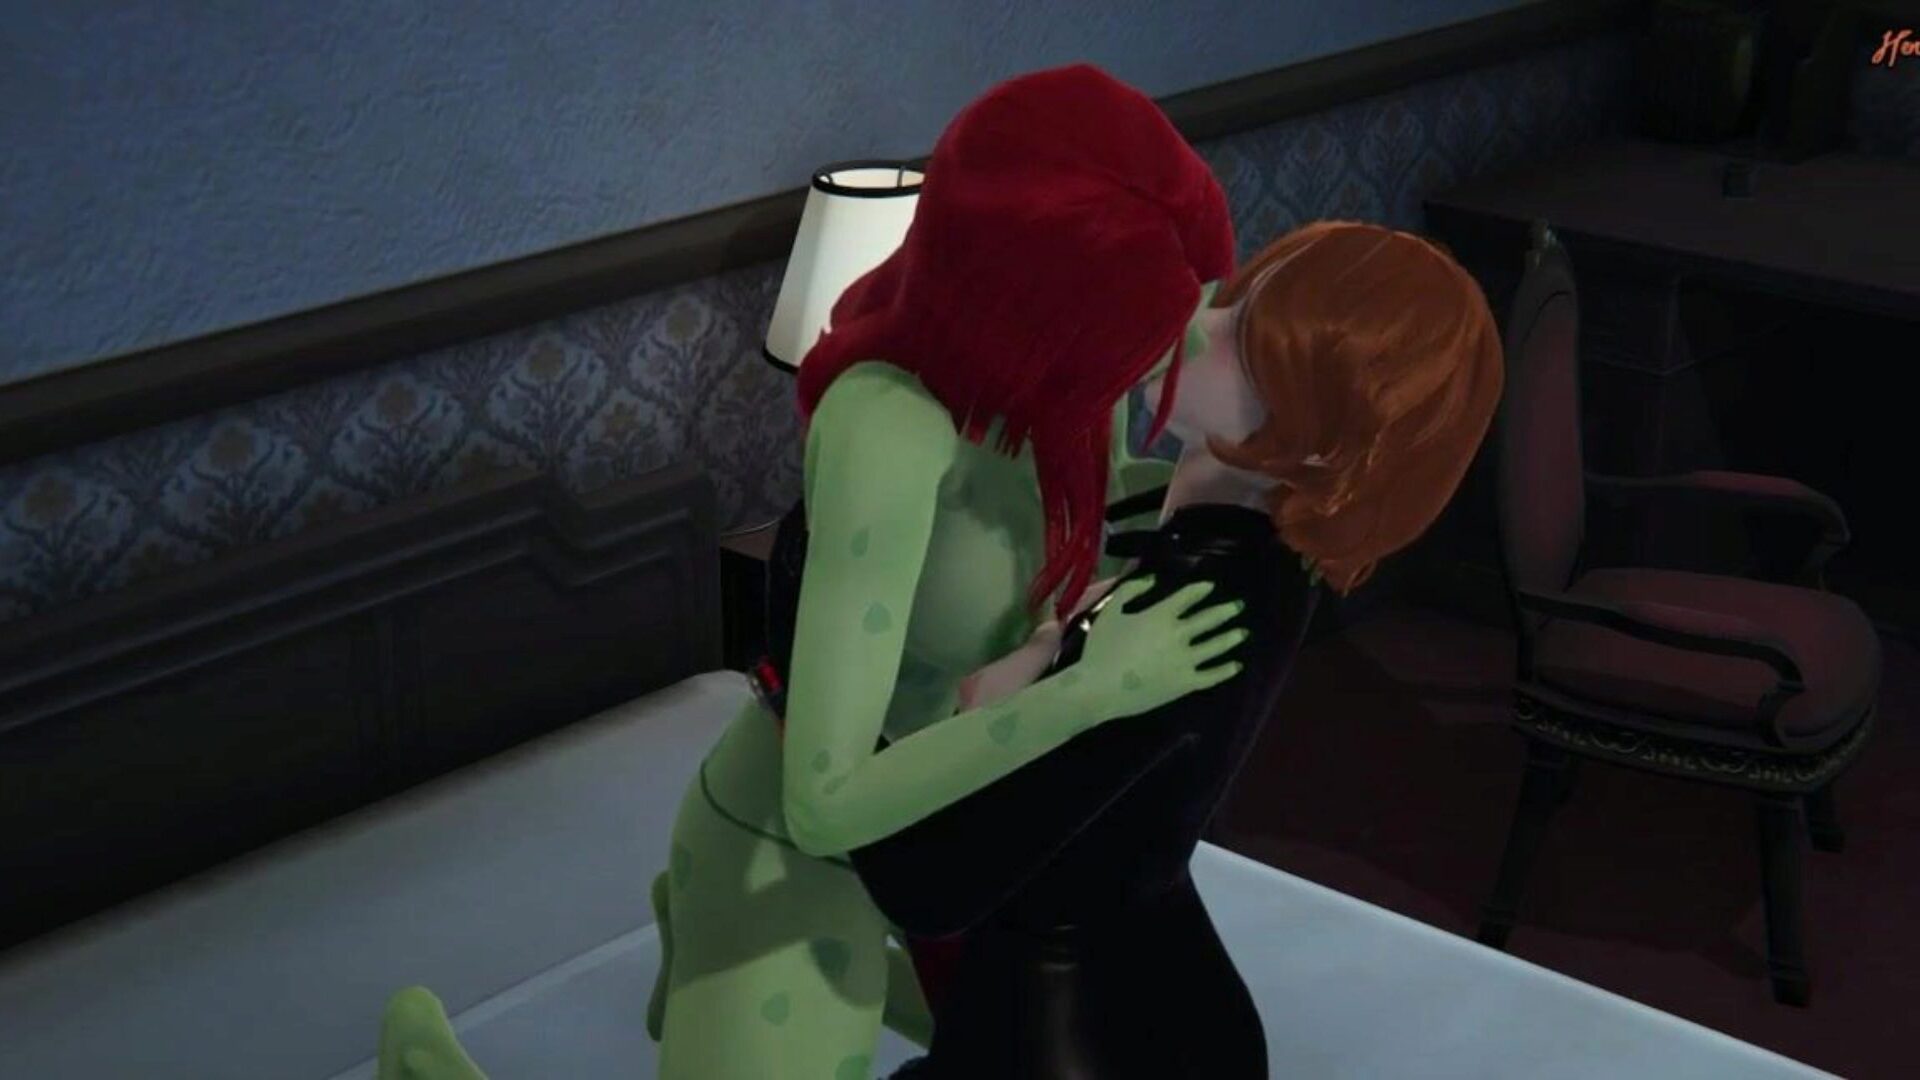 Poison Ivy copulates Black Widow with a romp toy until this babe jizzes